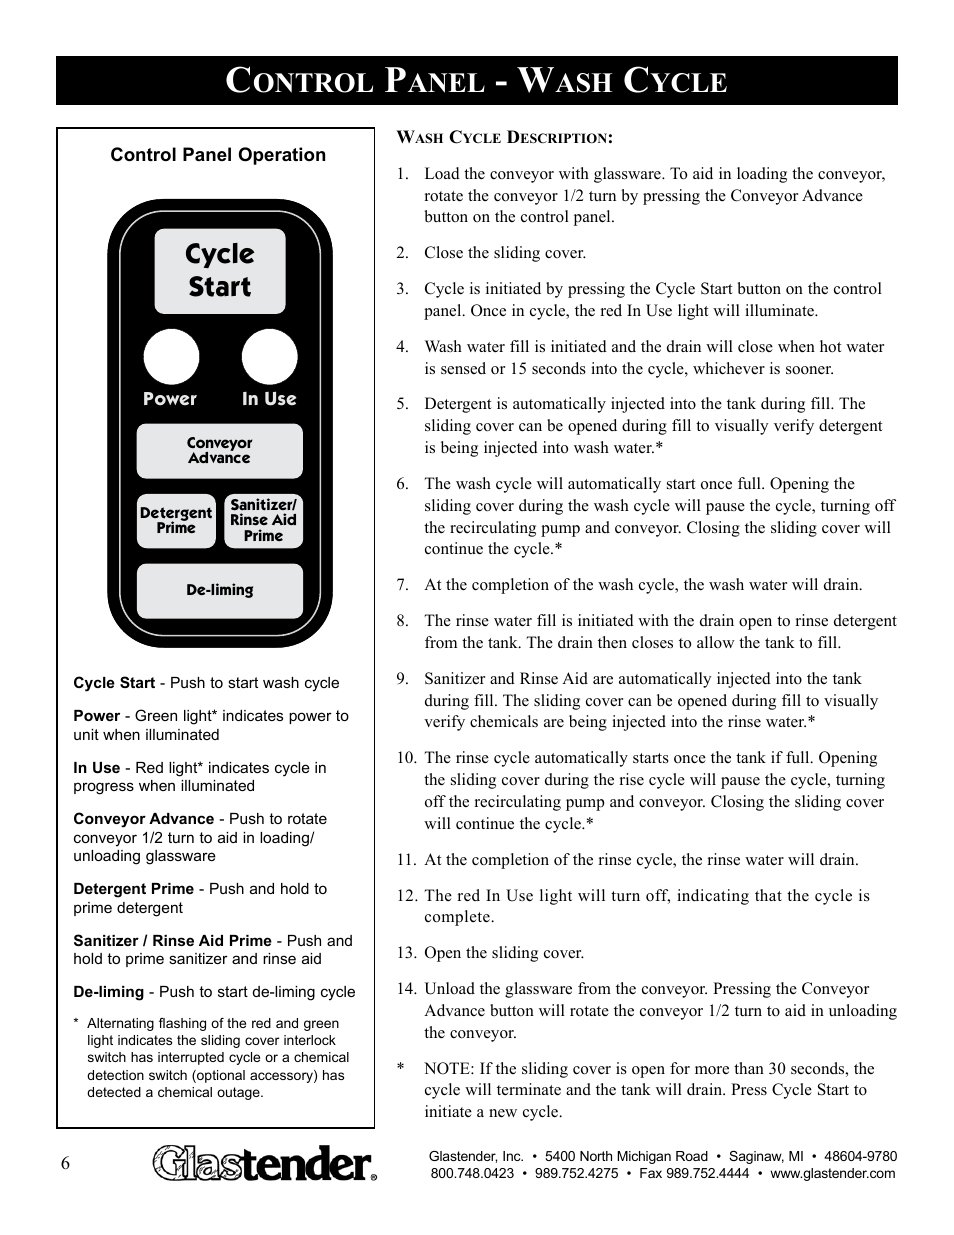 Ontrol, Anel, Ycle | Cycle start | Glastender GW24 User Manual | Page 8 / 16